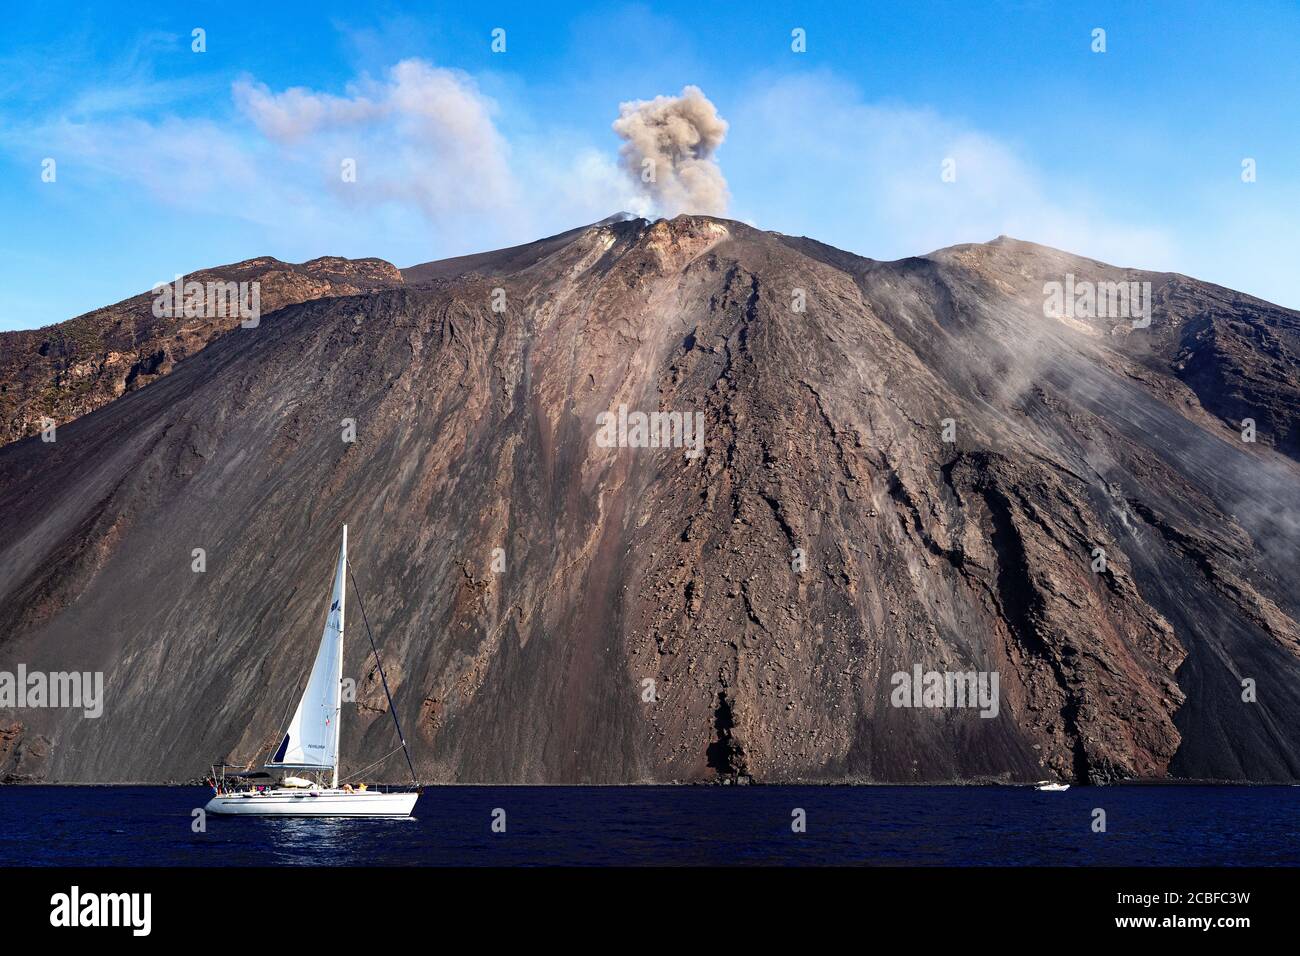 The Stream of Fire (Sciara del Fuoco in Italian) marks the path of the lava flows that occur during Stromboli’s eruptions, Aeolian Islands, Sicily. Stock Photo